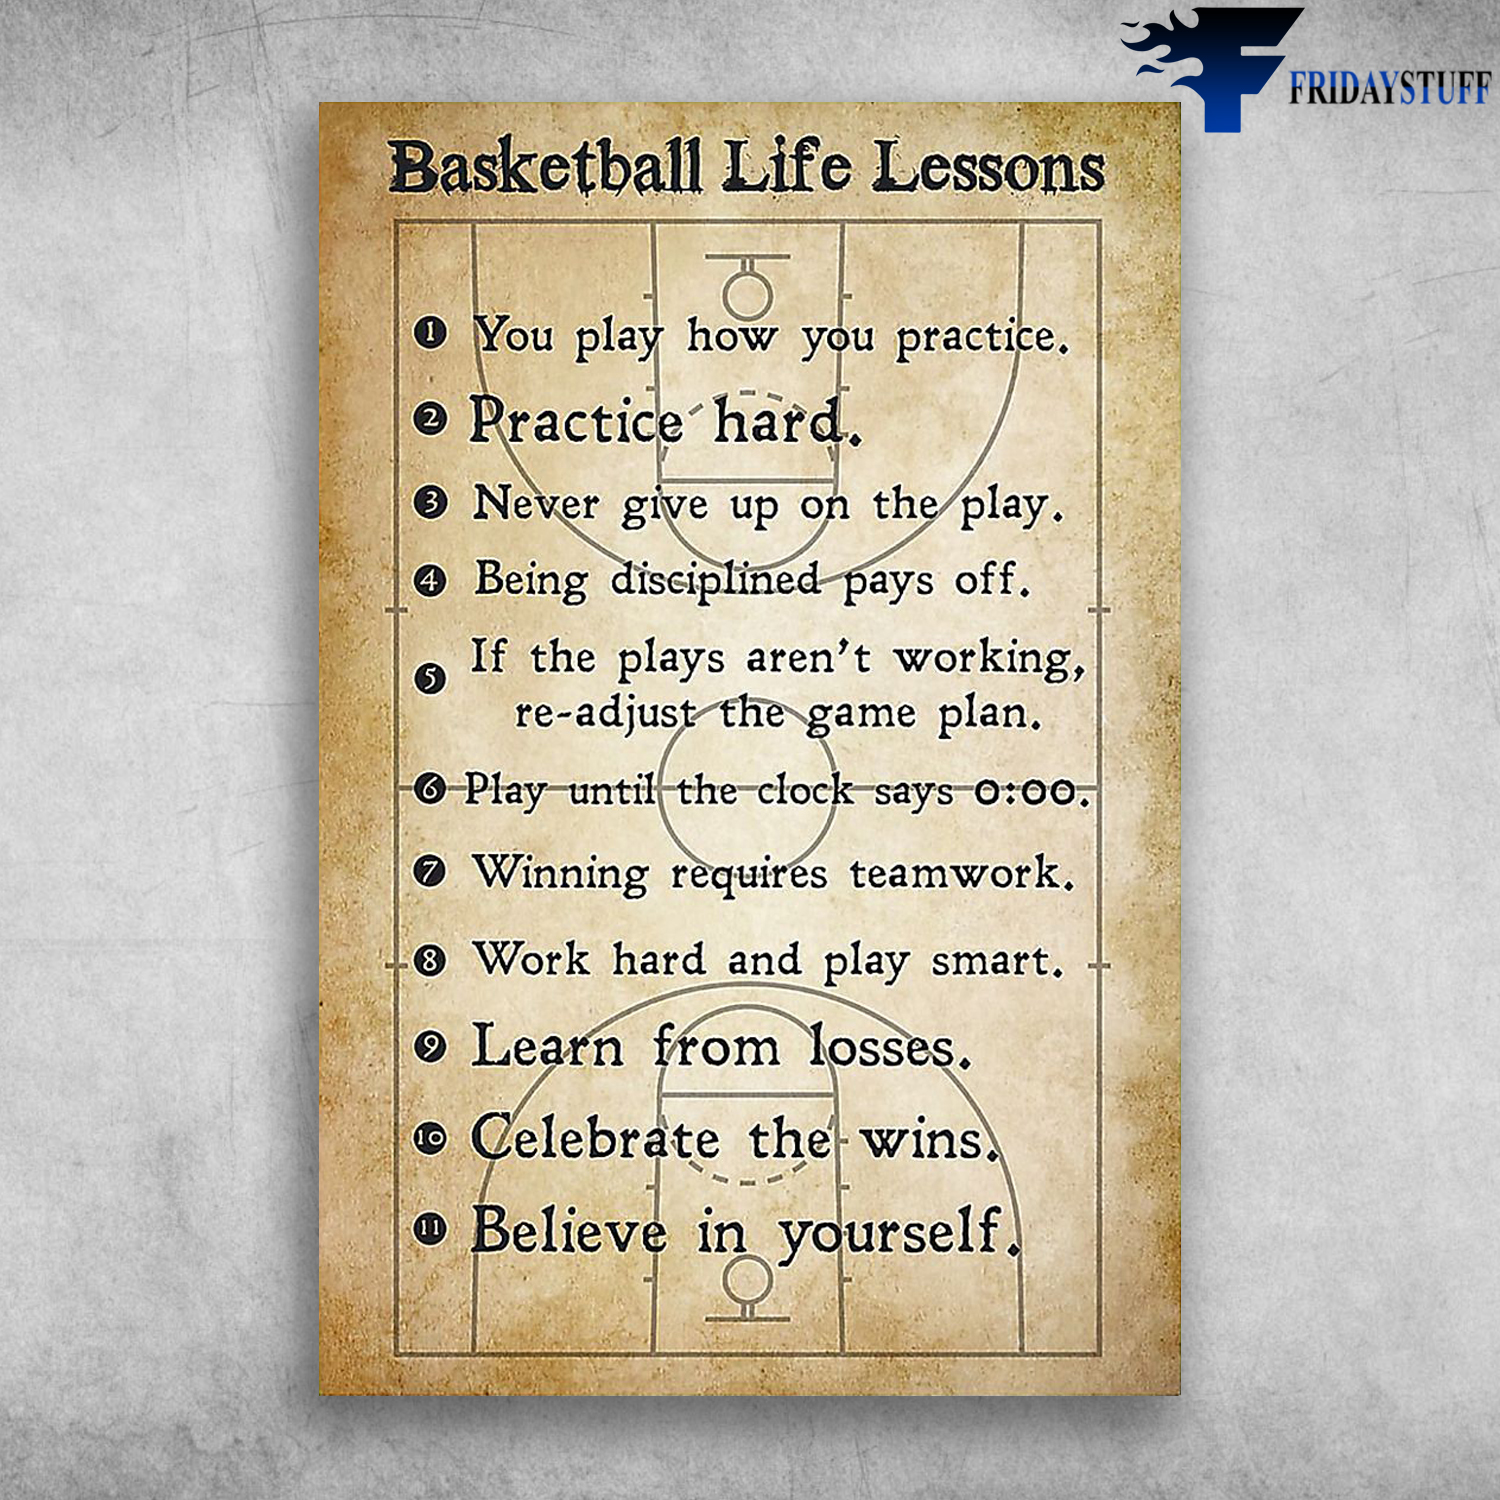 Basketball Life Lessons You Play How You Practice Hard